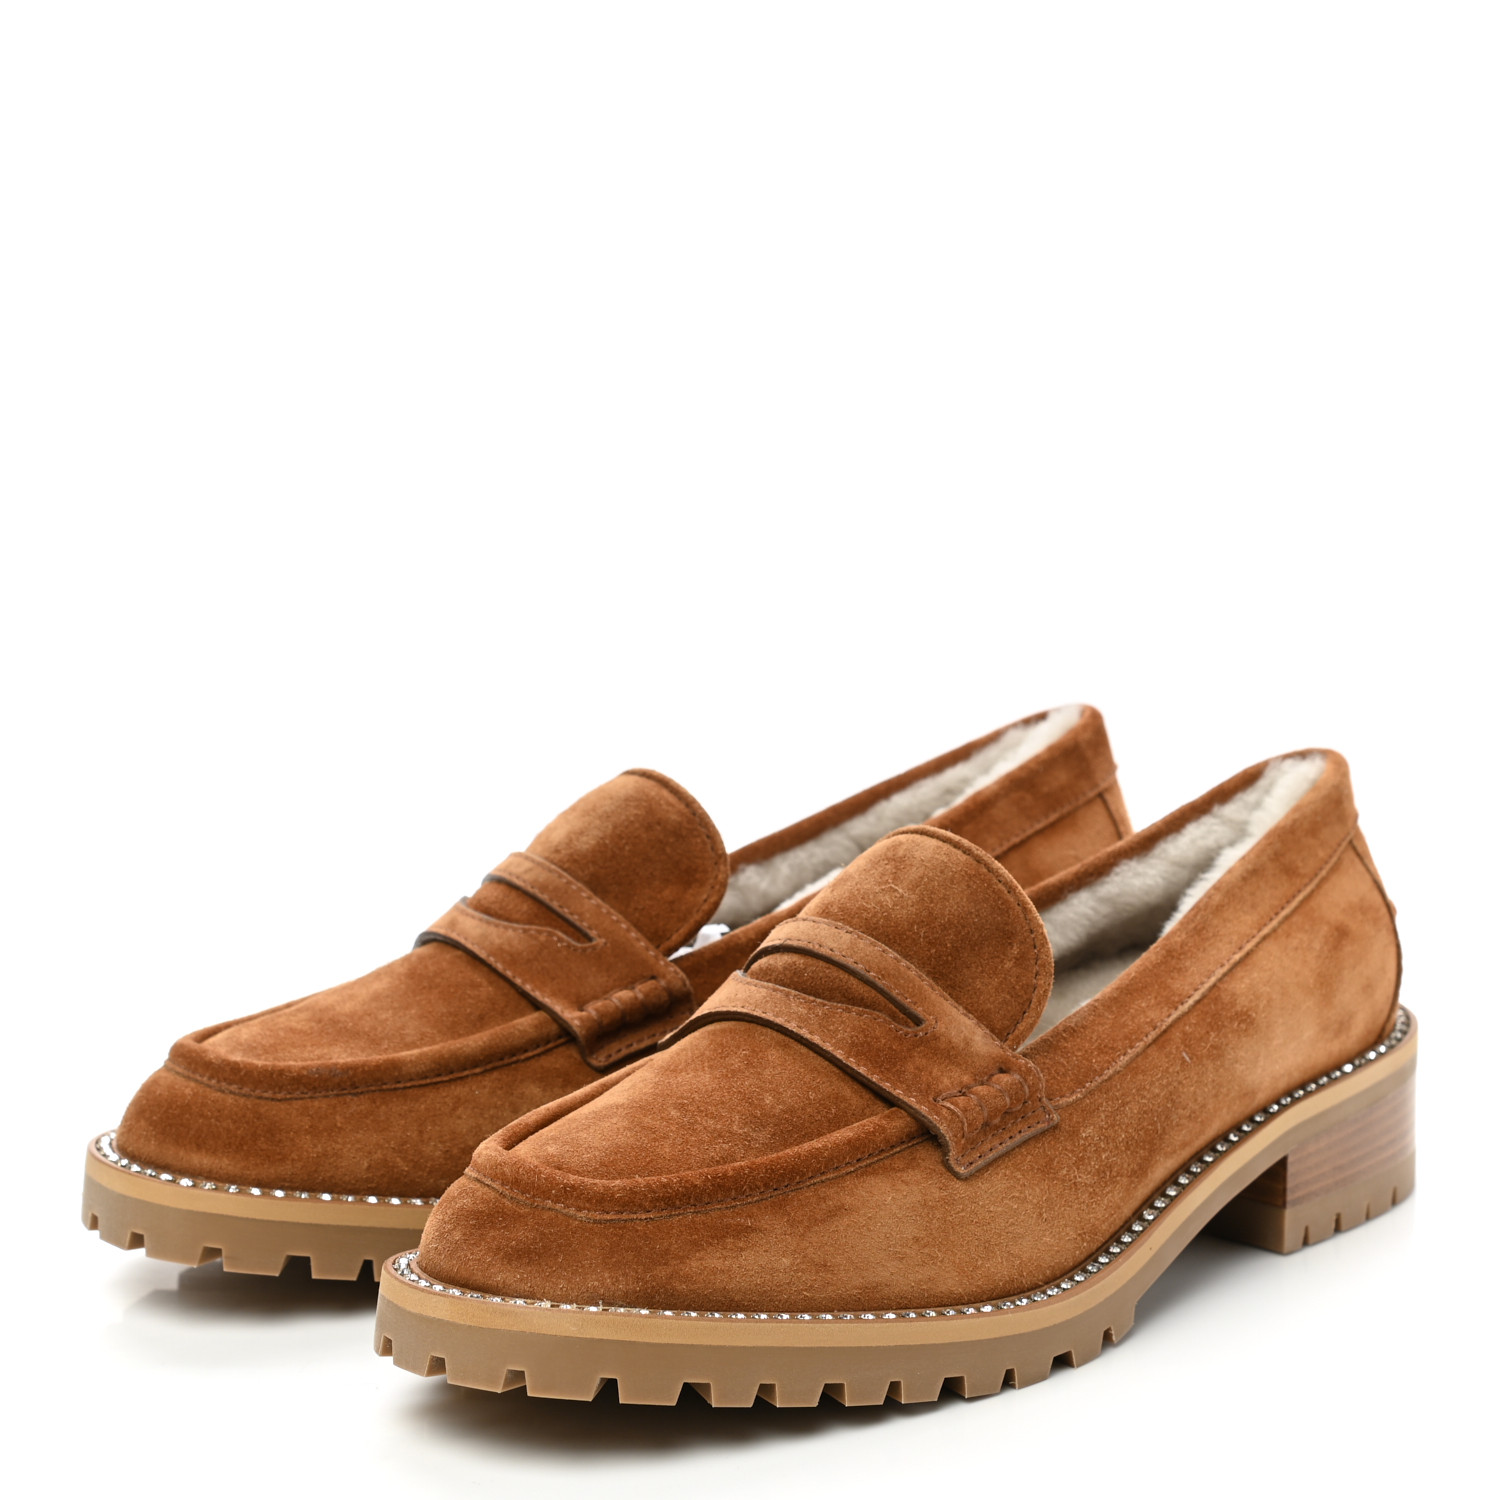 side view of JIMMY CHOO Suede Shearling Crystal Deanna Penny Loafers in the color Natural Tan by FASHIONPHILE